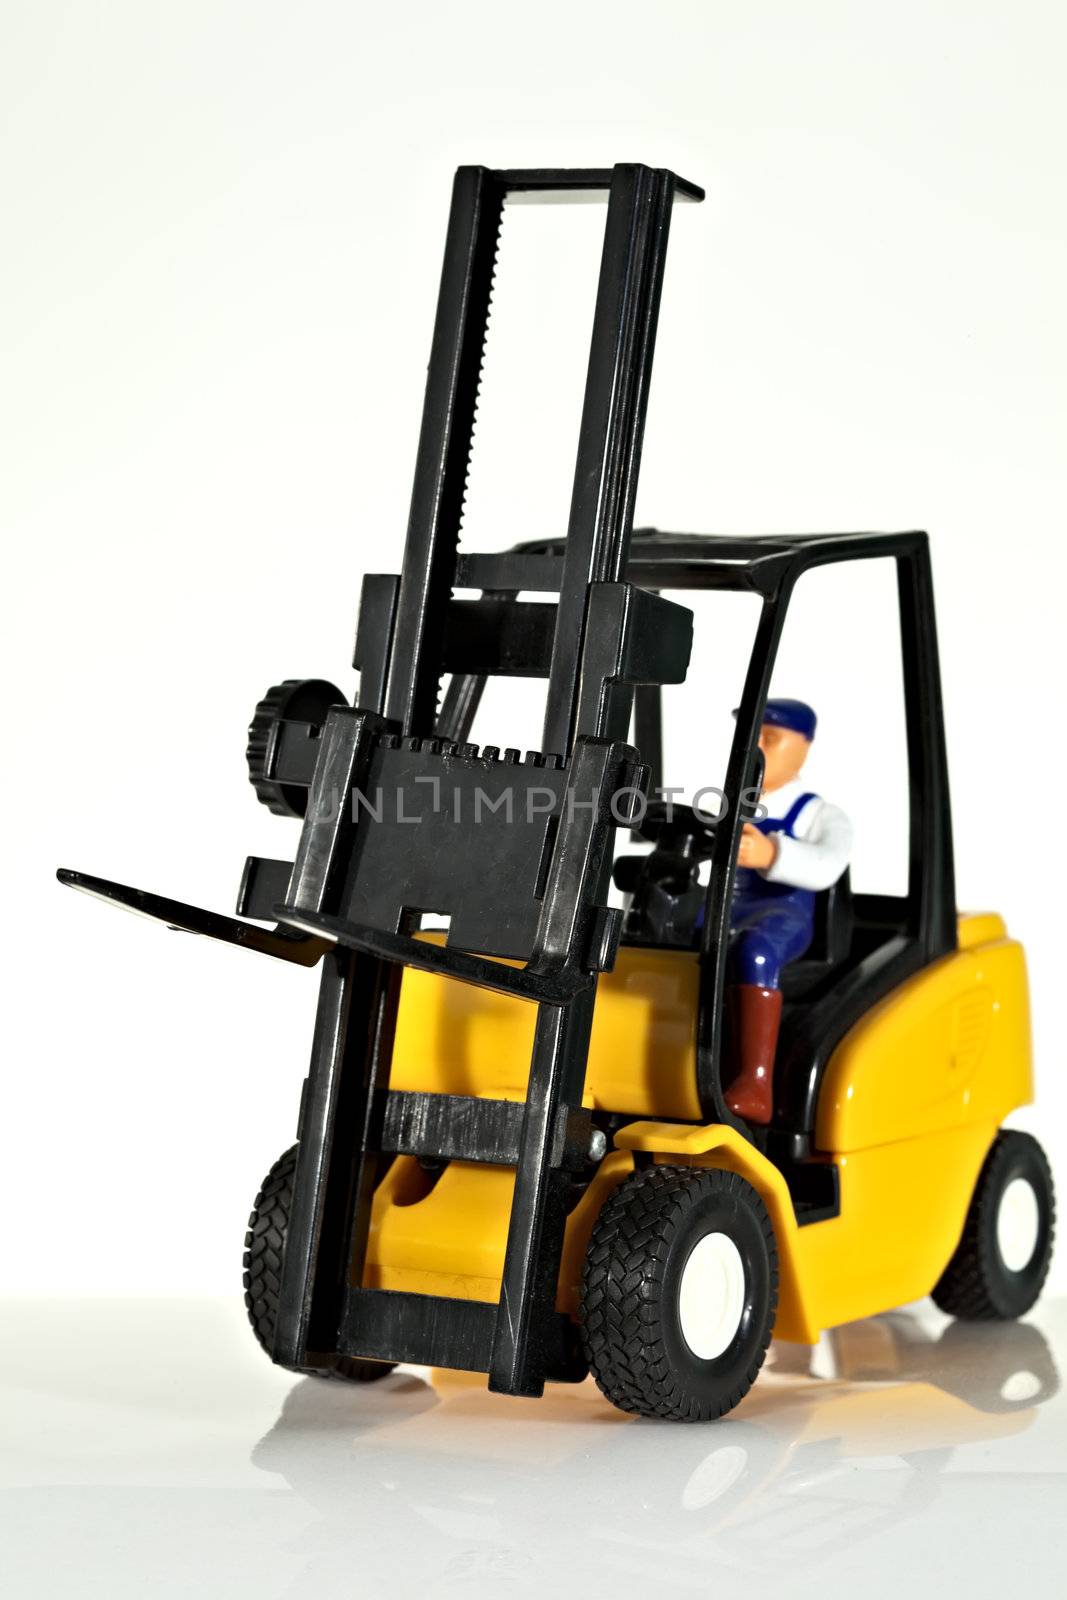 A toy forklift truck